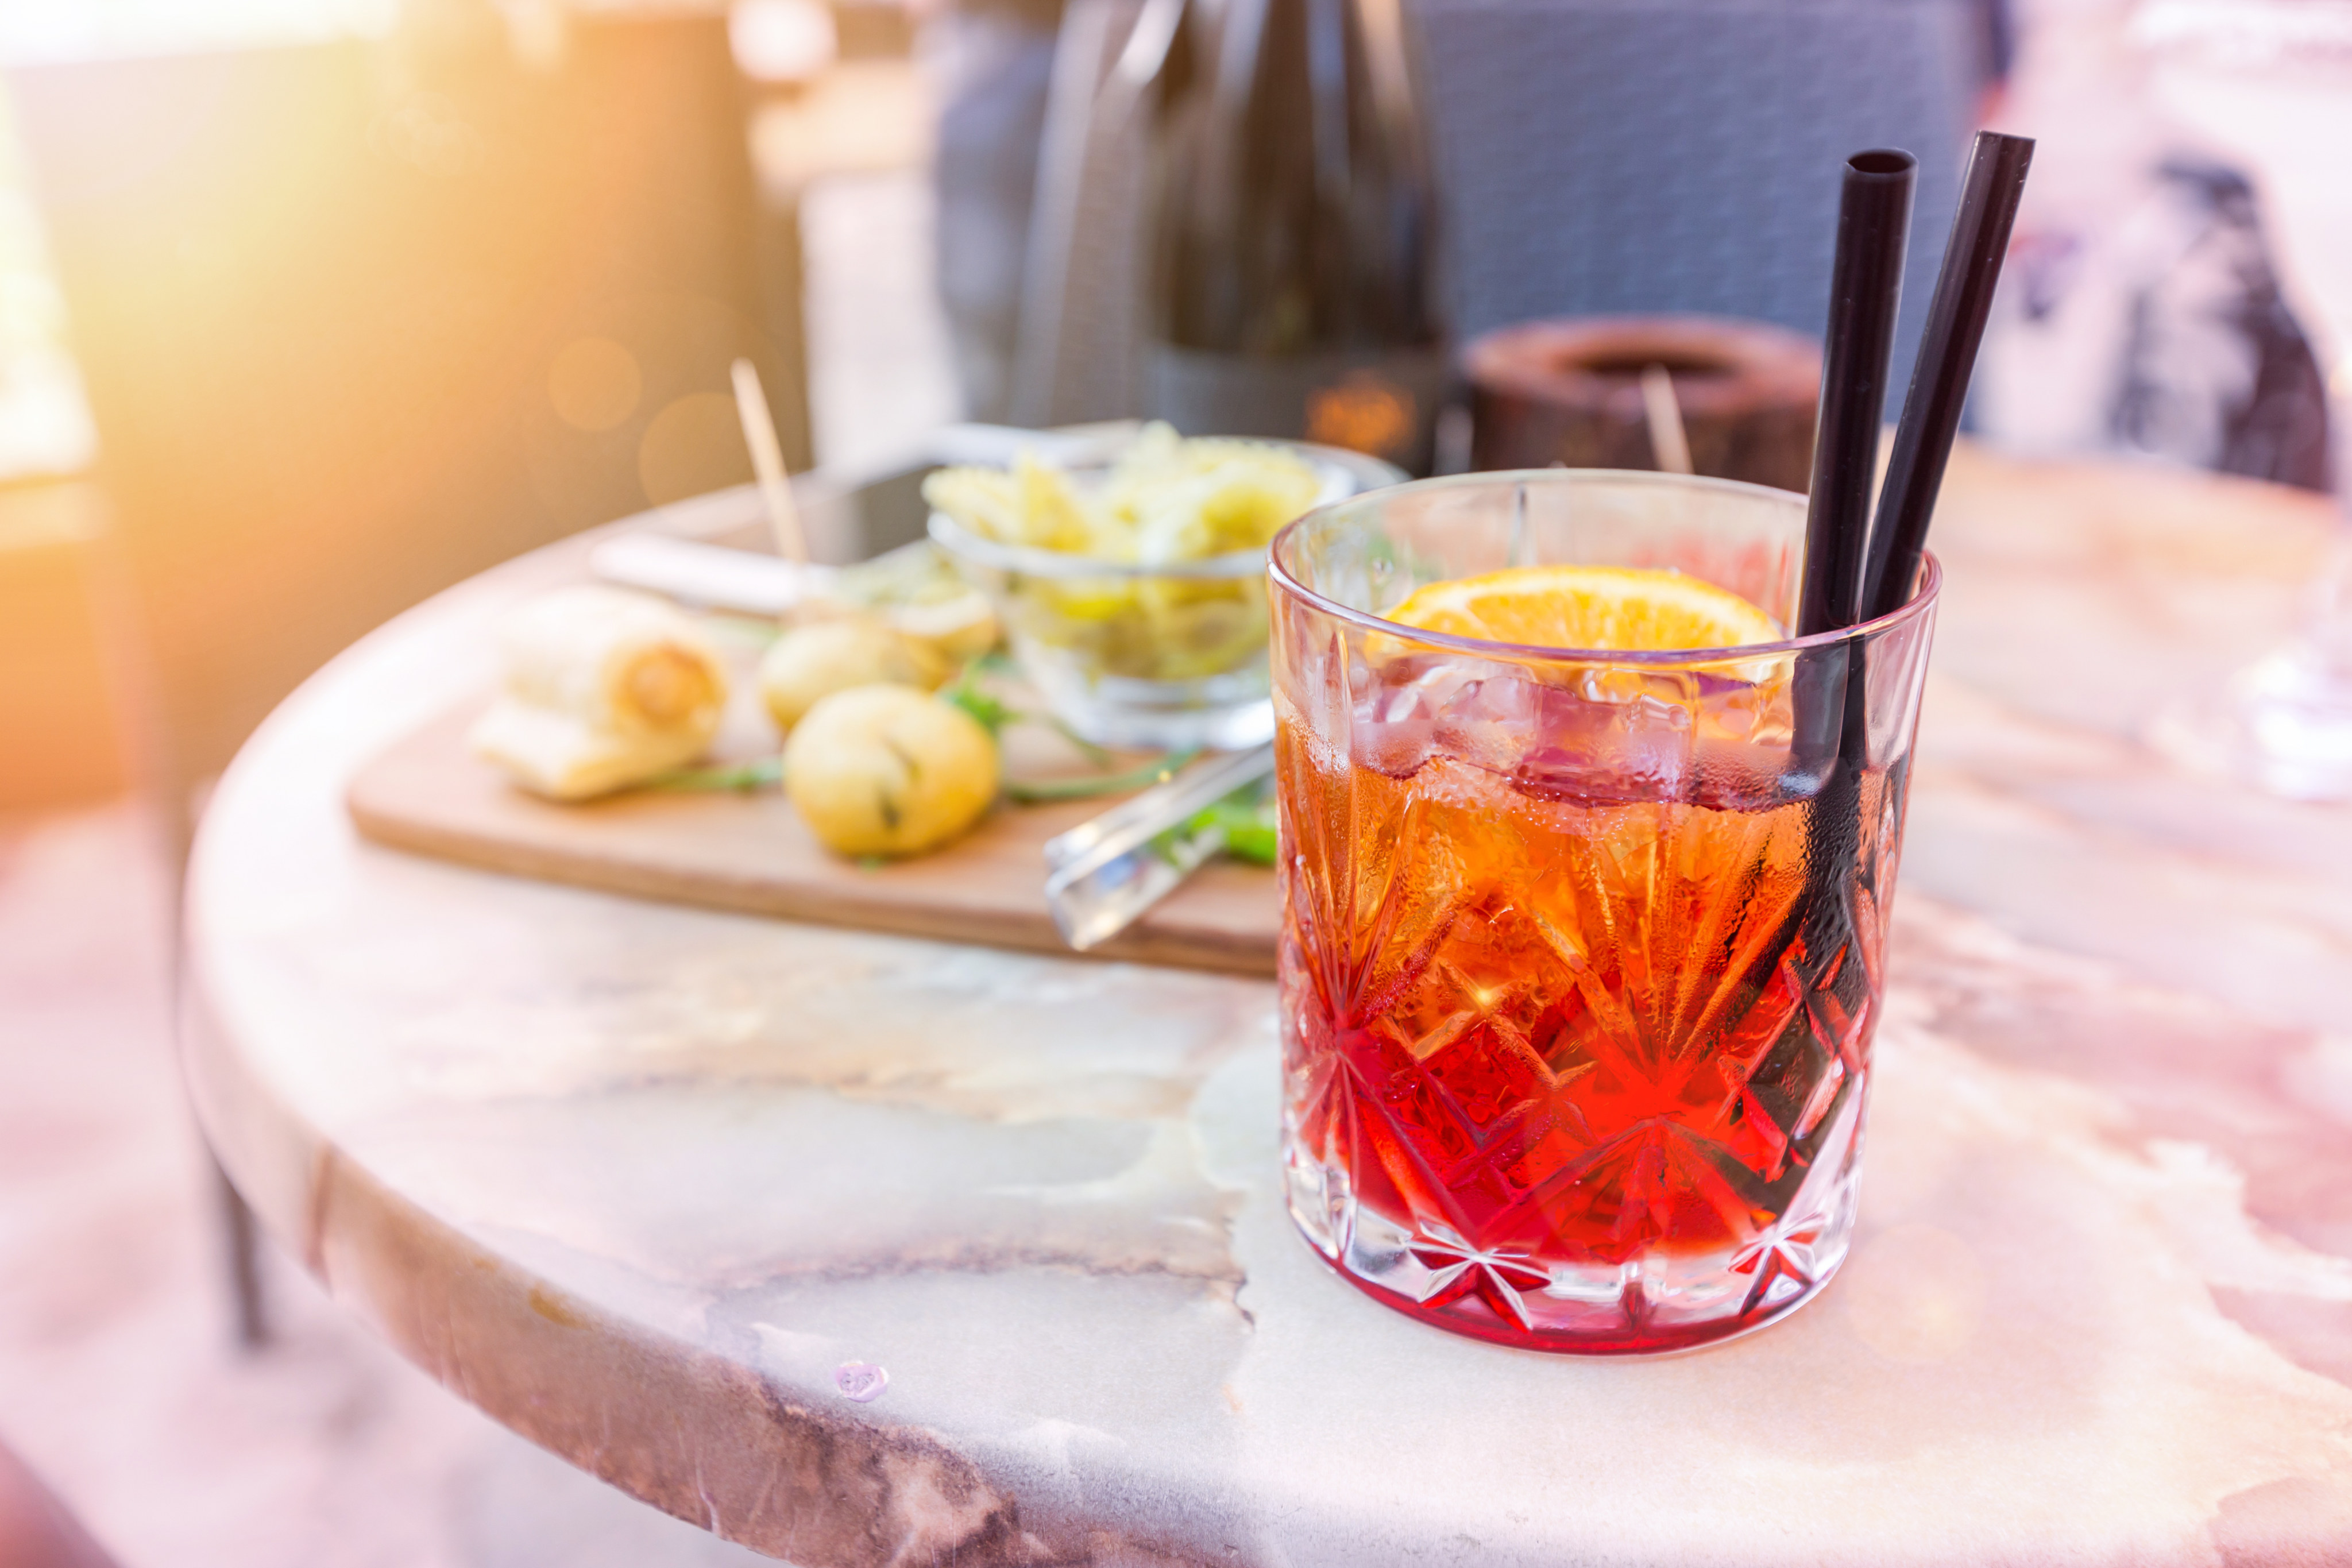 Mezcal Negroni cocktail Italian aperitivo on the table in the open area of restaurante. Photo: Getty Images